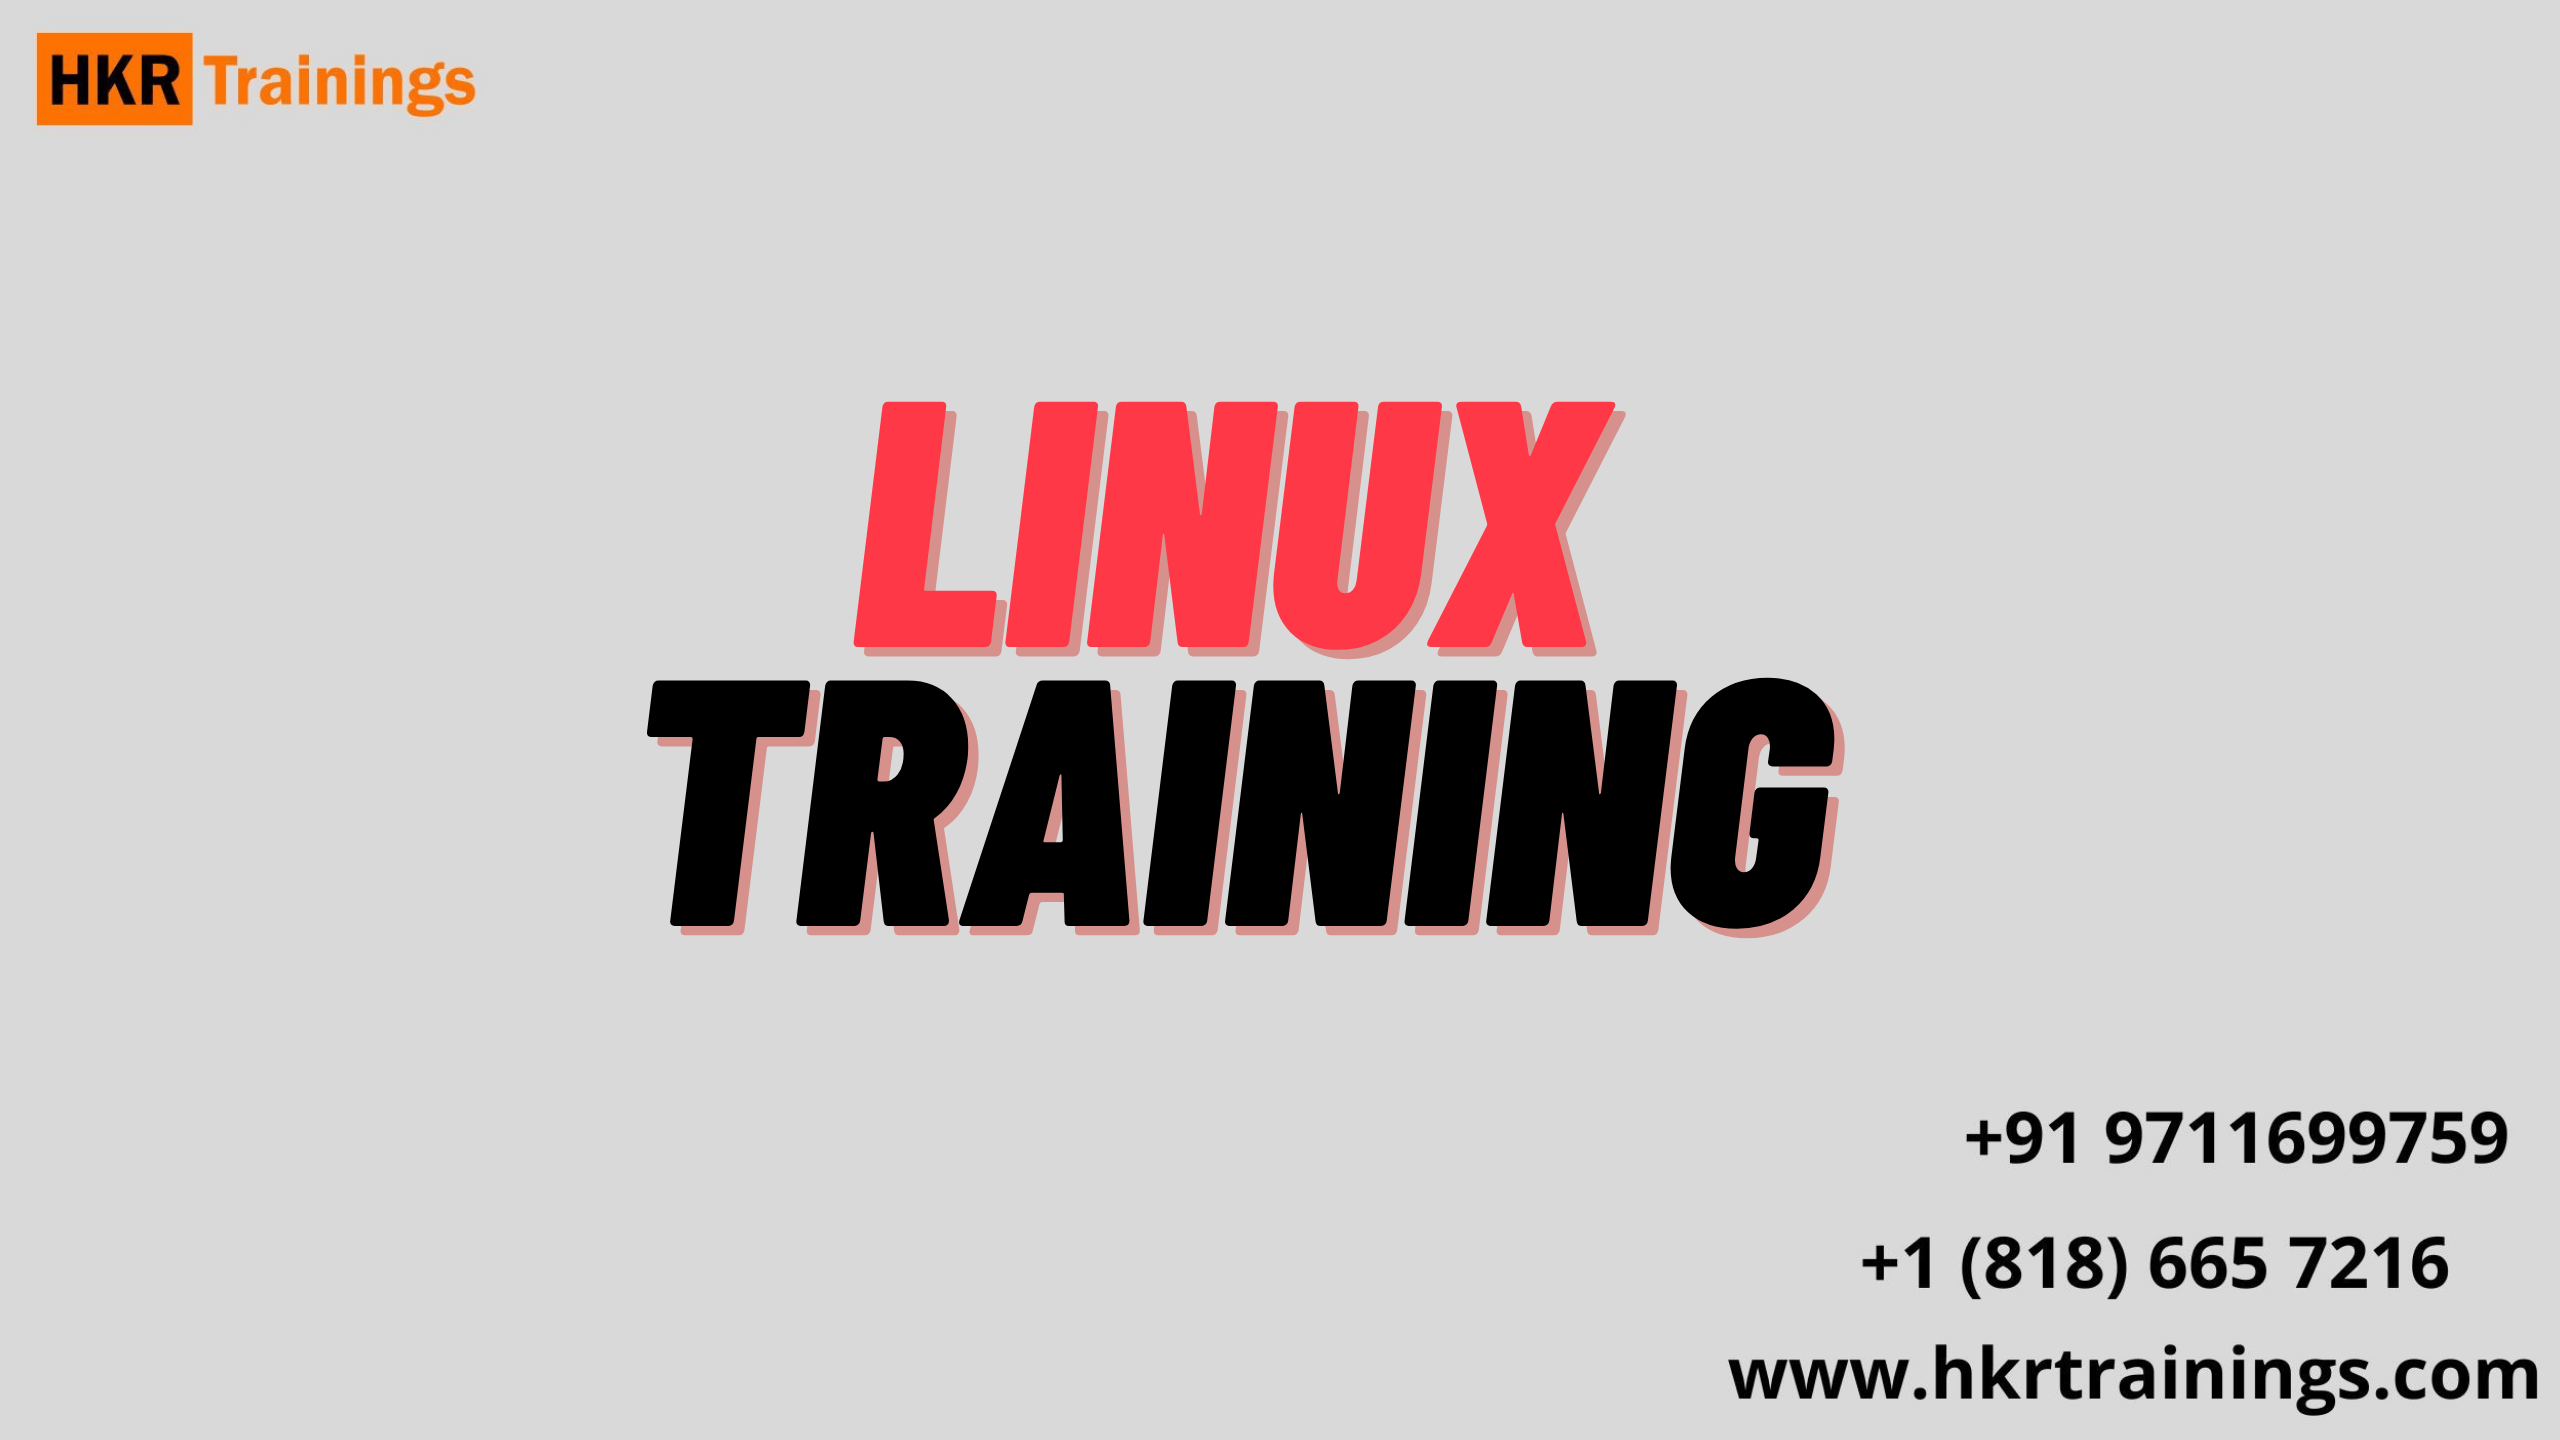 Get Your Dream Job With Our Linux Certification Training